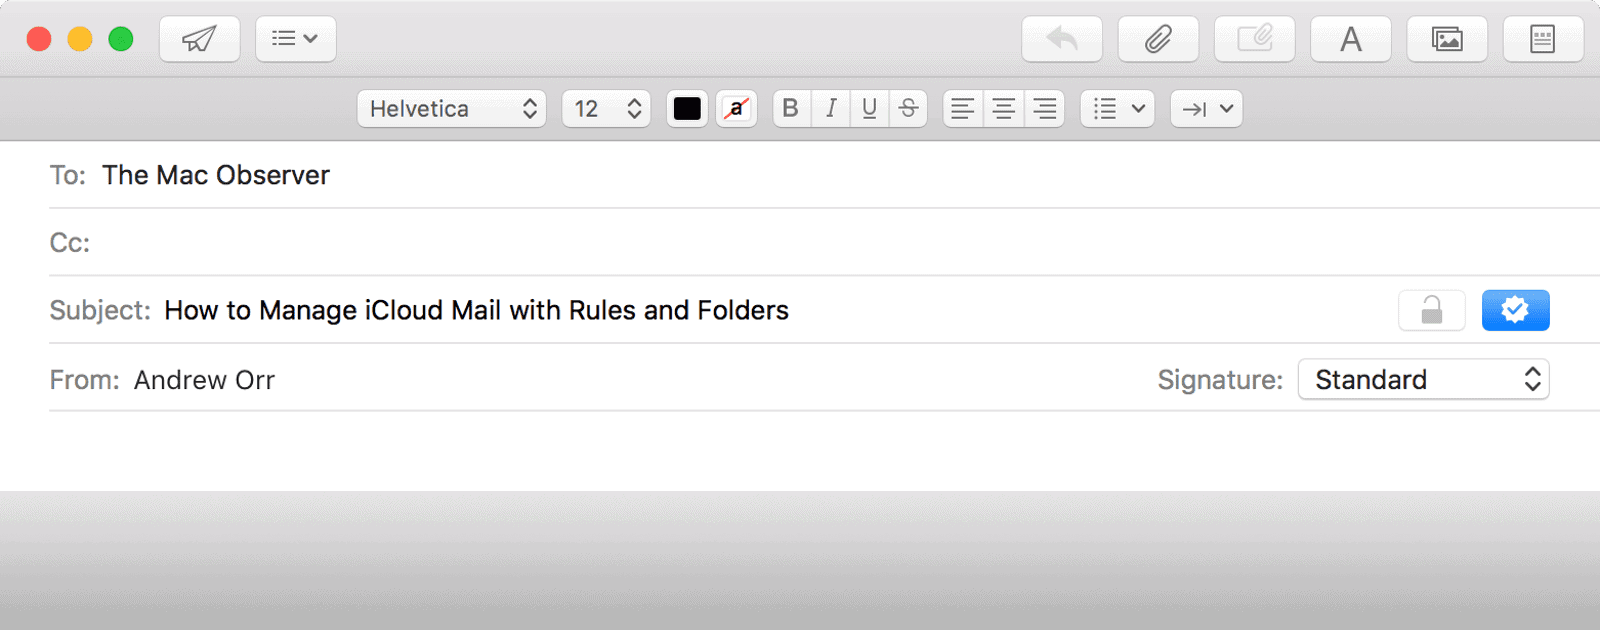 How To Manage iCloud Mail with Rules and Folders